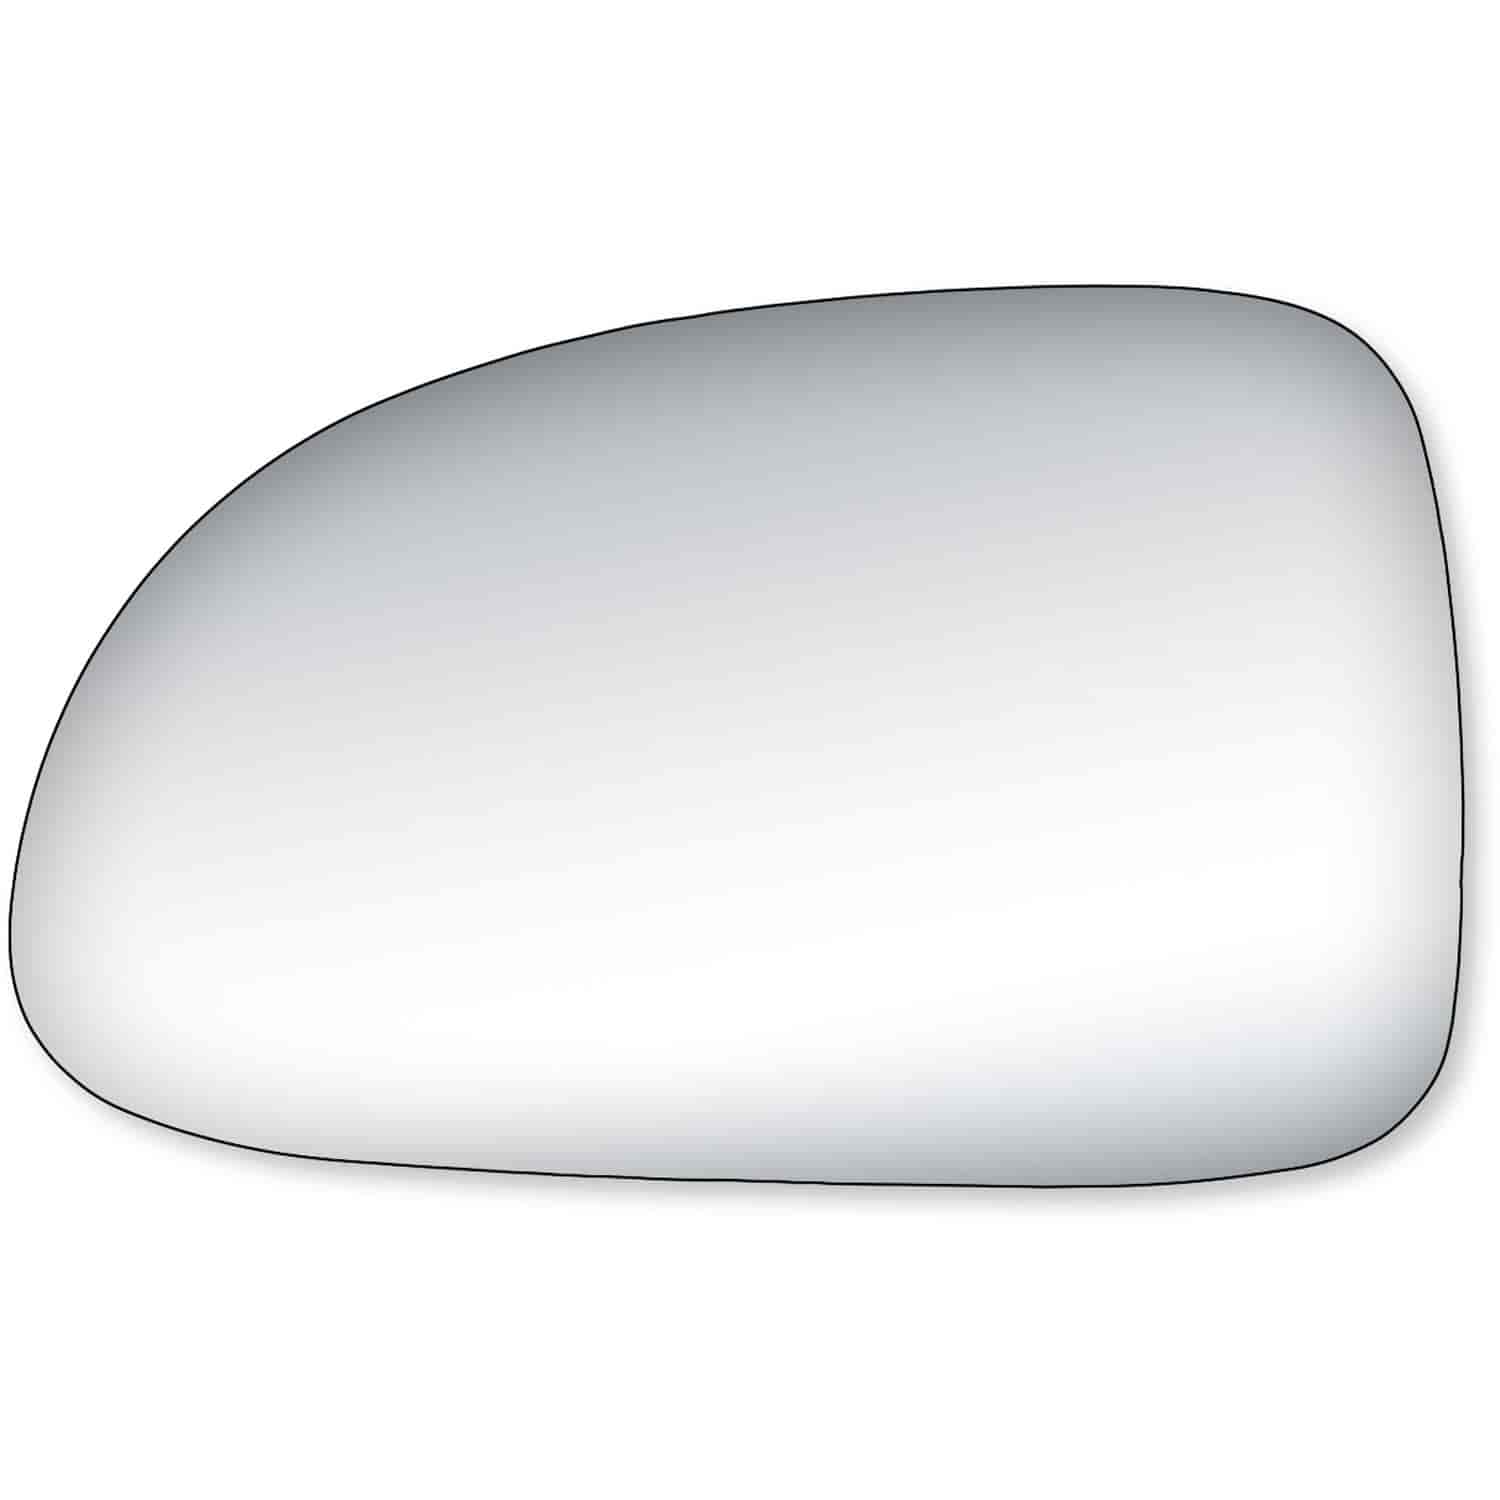 Replacement Glass for 97-00 Dakota Pick-Up 5x7 ; 97-00 Durango 5x7 the glass measures 4 7/8 tall by